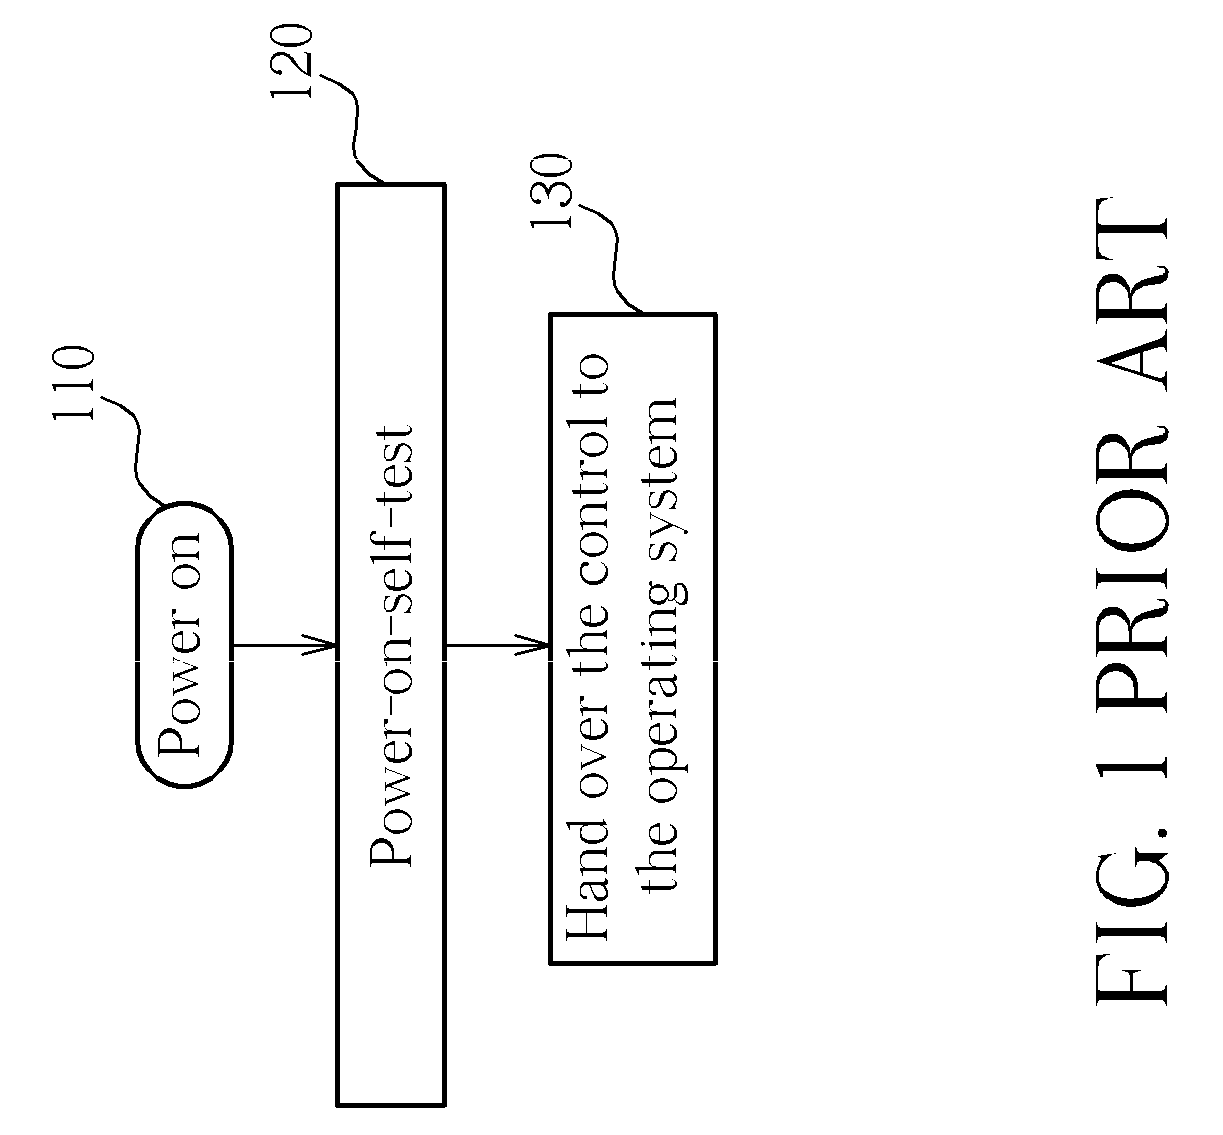 System and method for tracking and recording system configurations of electronic devices